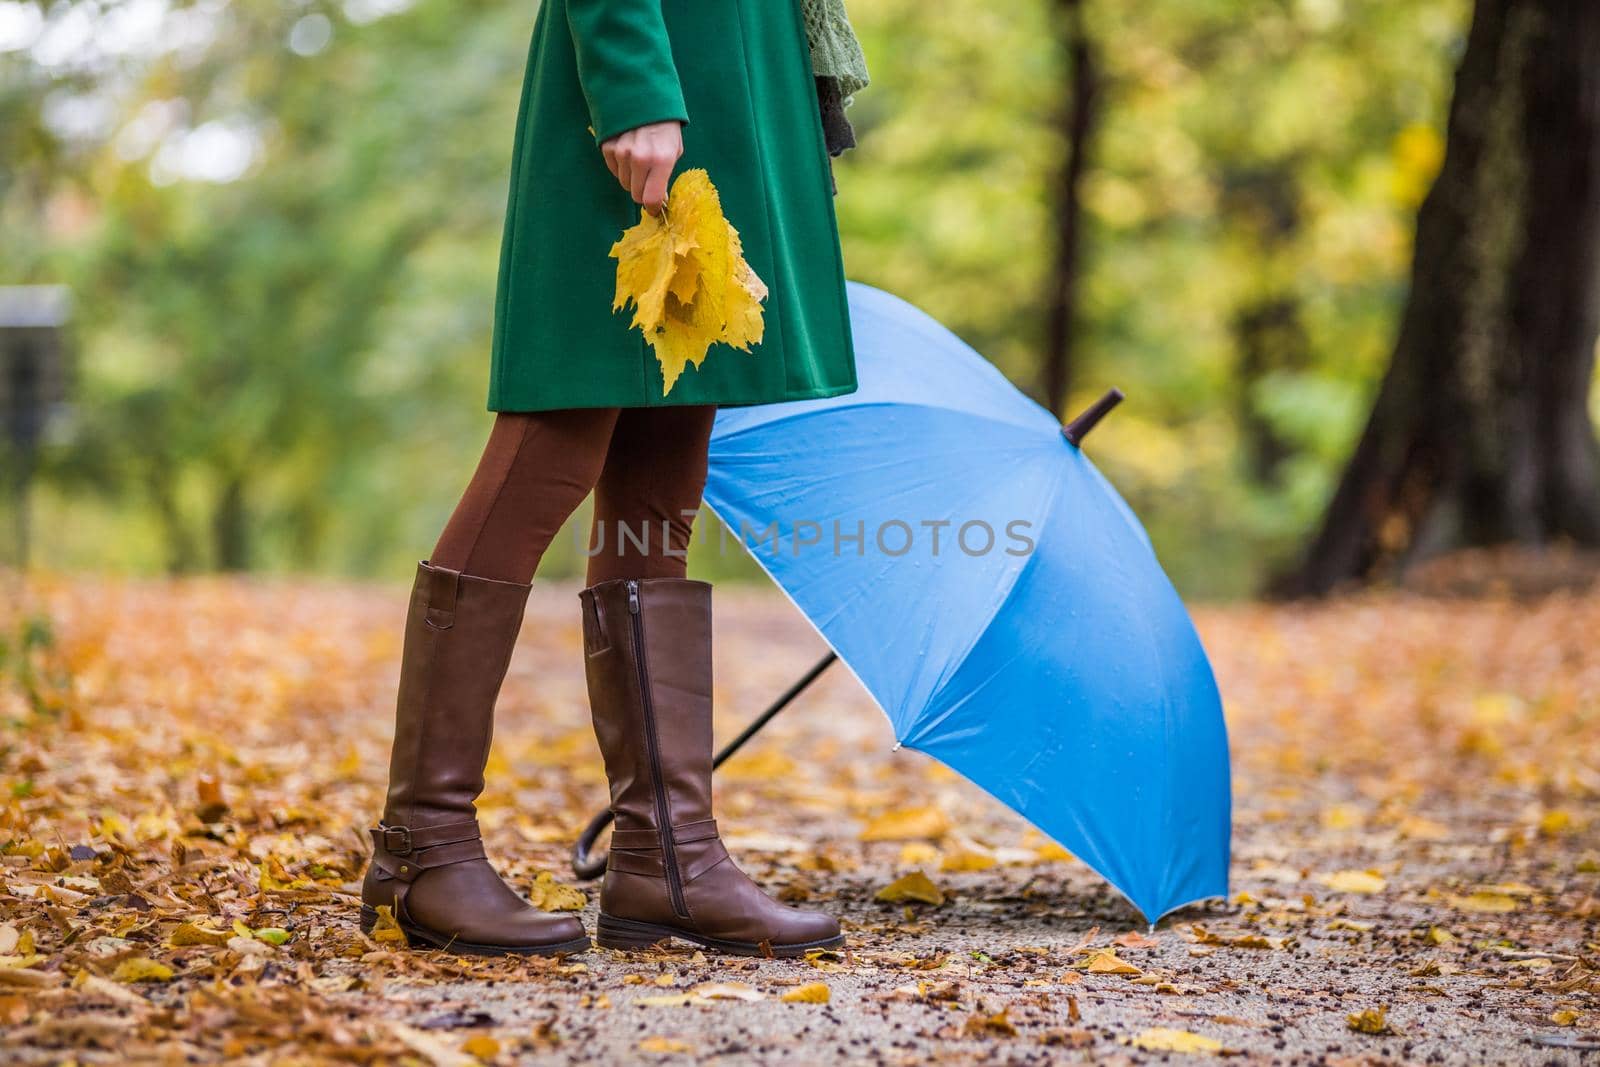 Close up photo of umbrella and woman in boots holding fall leaves while standing in the park.